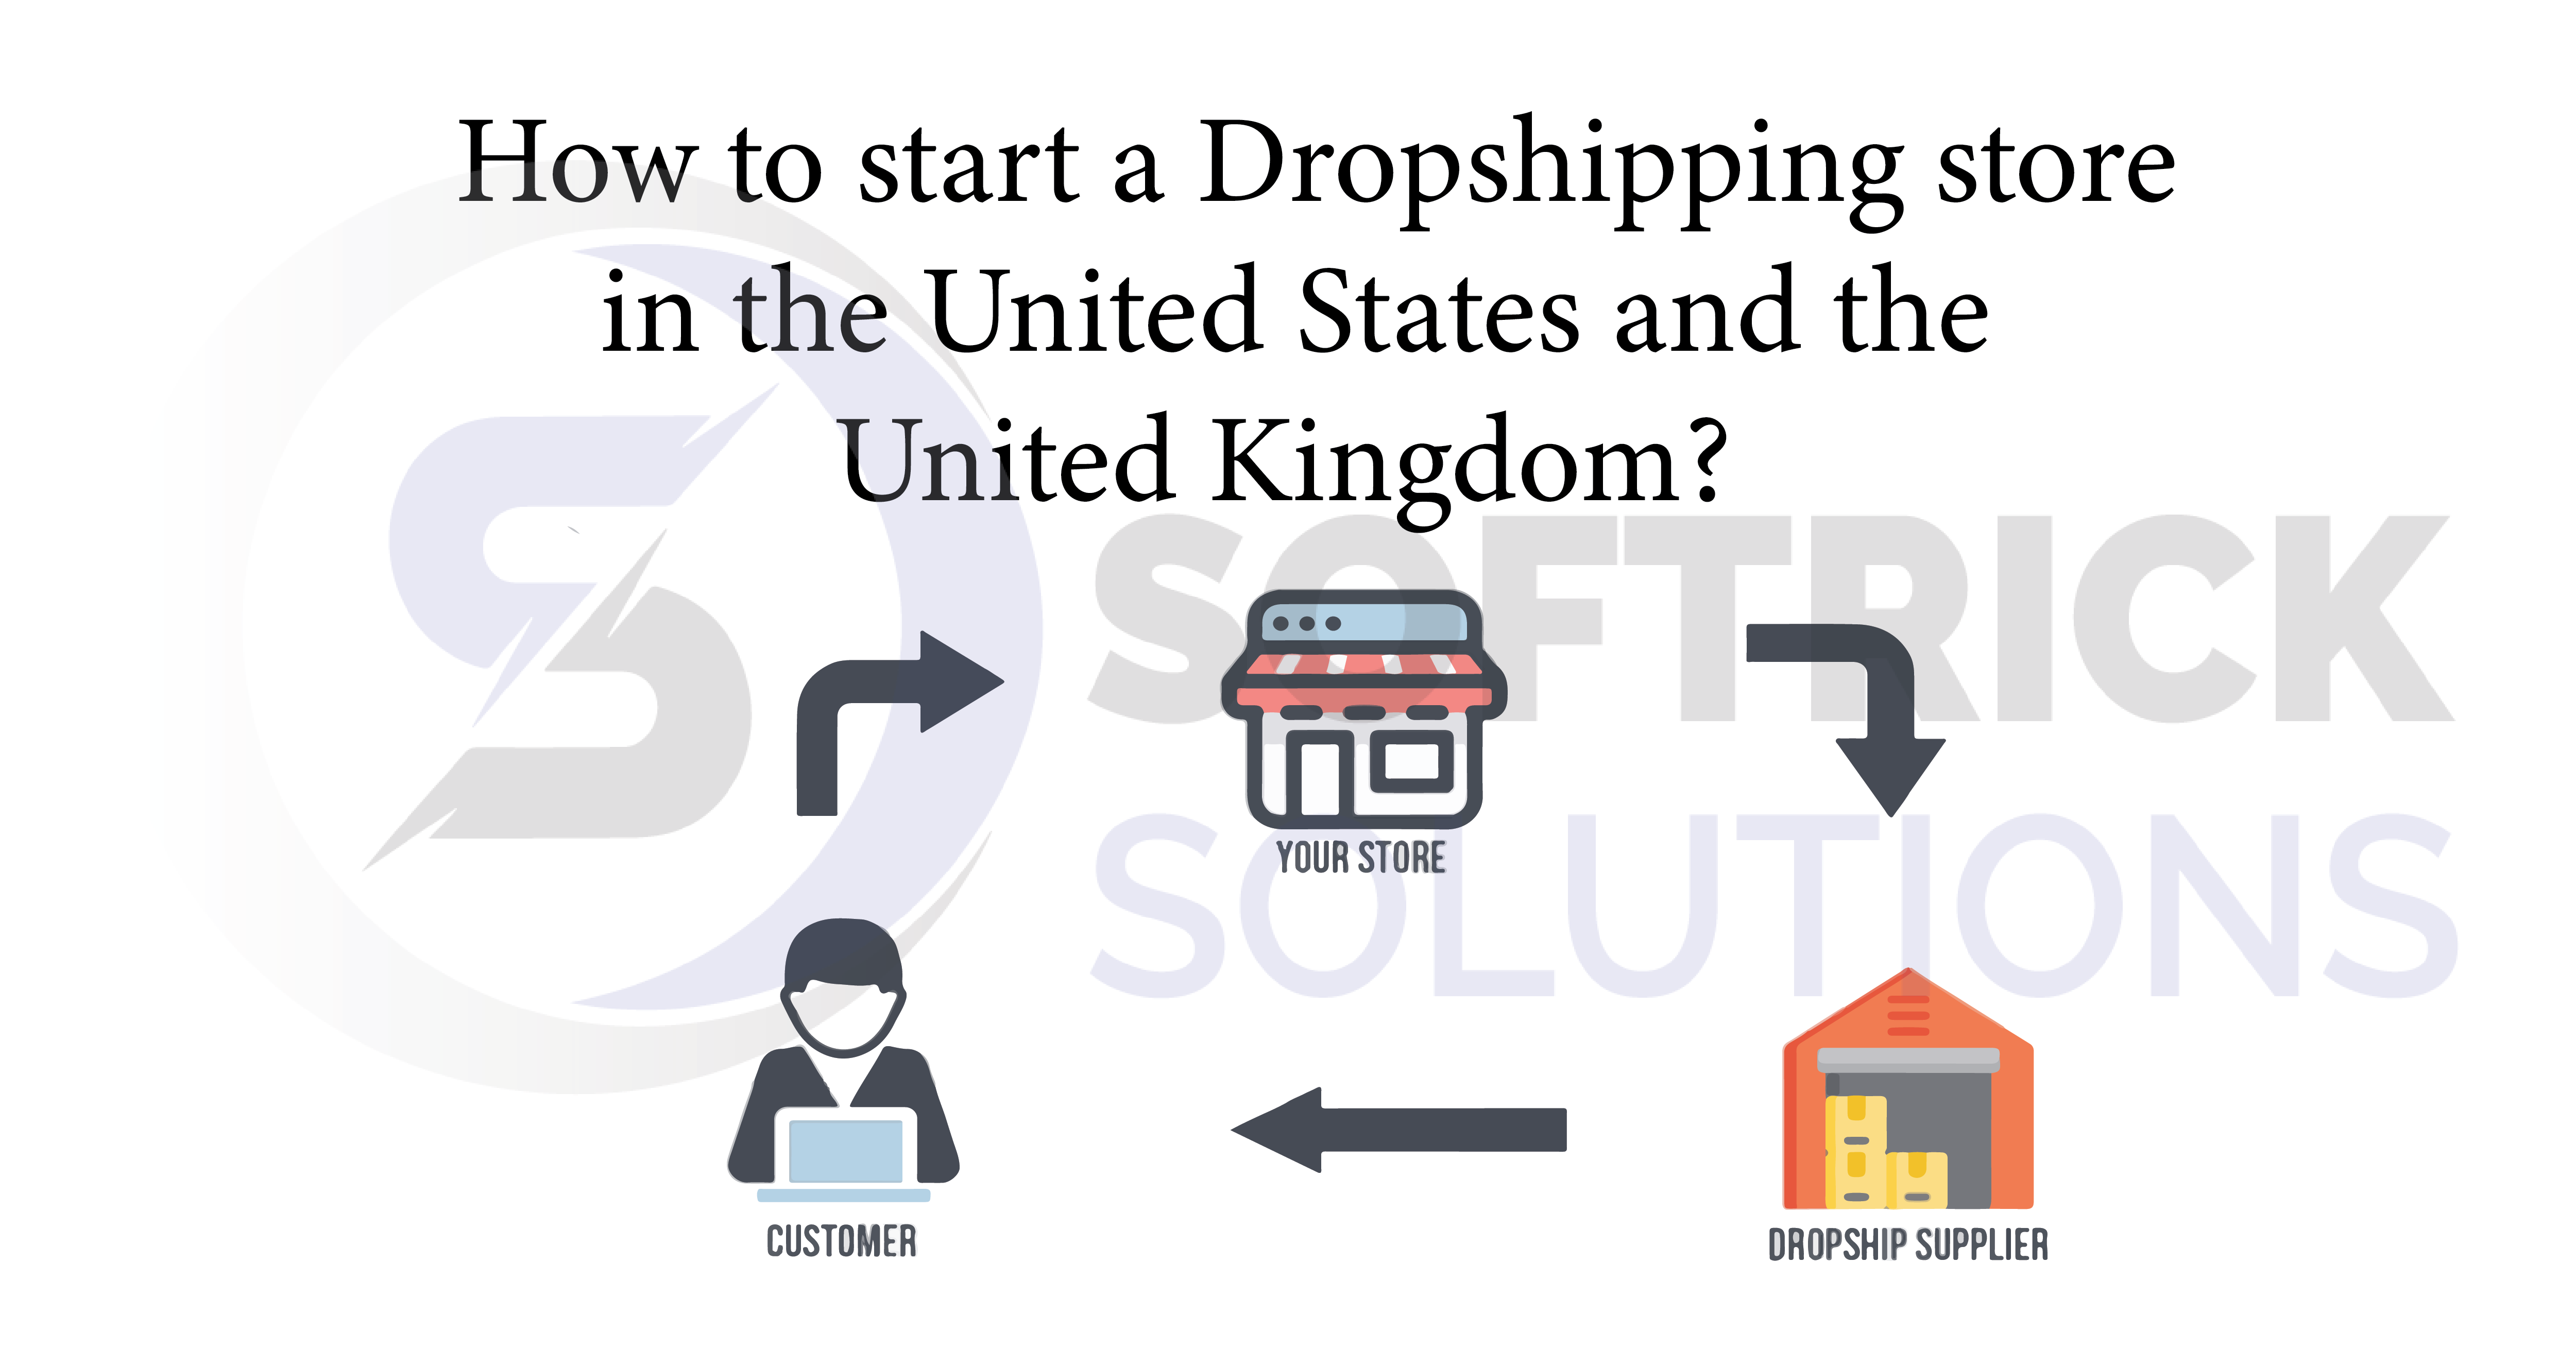 How to start a dropshipping store in the United States and the United Kingdom?